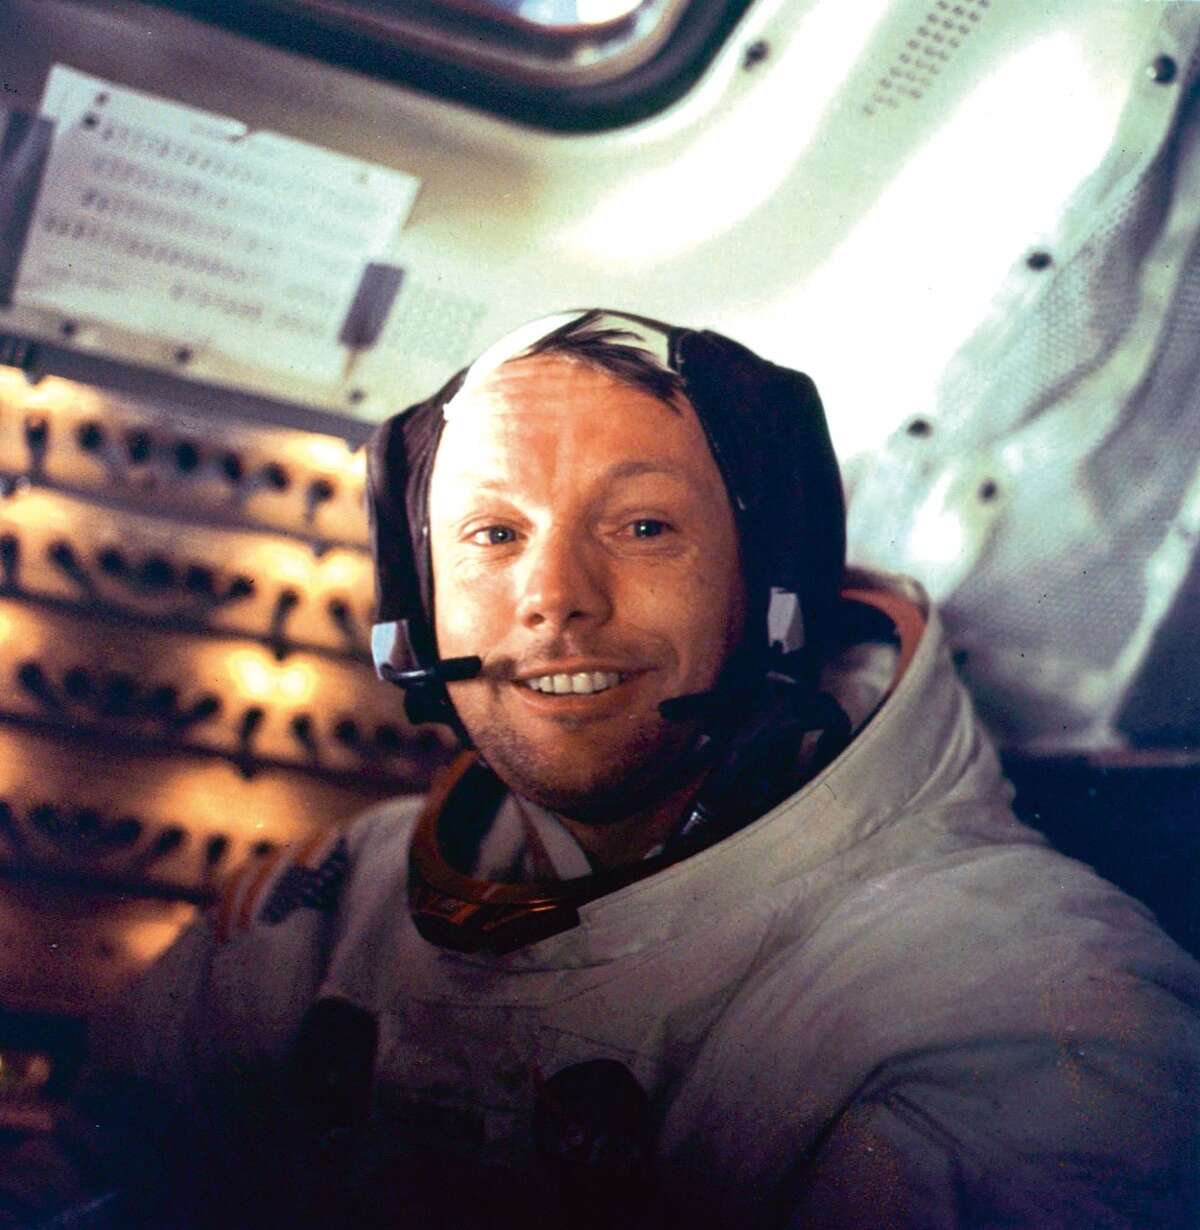 Apollo 11 space mission US astronaut Neil Armstrong is seen smiling at the camera aboard the lunar module "Eagle" on July 21, 1969 after spending more than 2½ hours on the lunar surface.